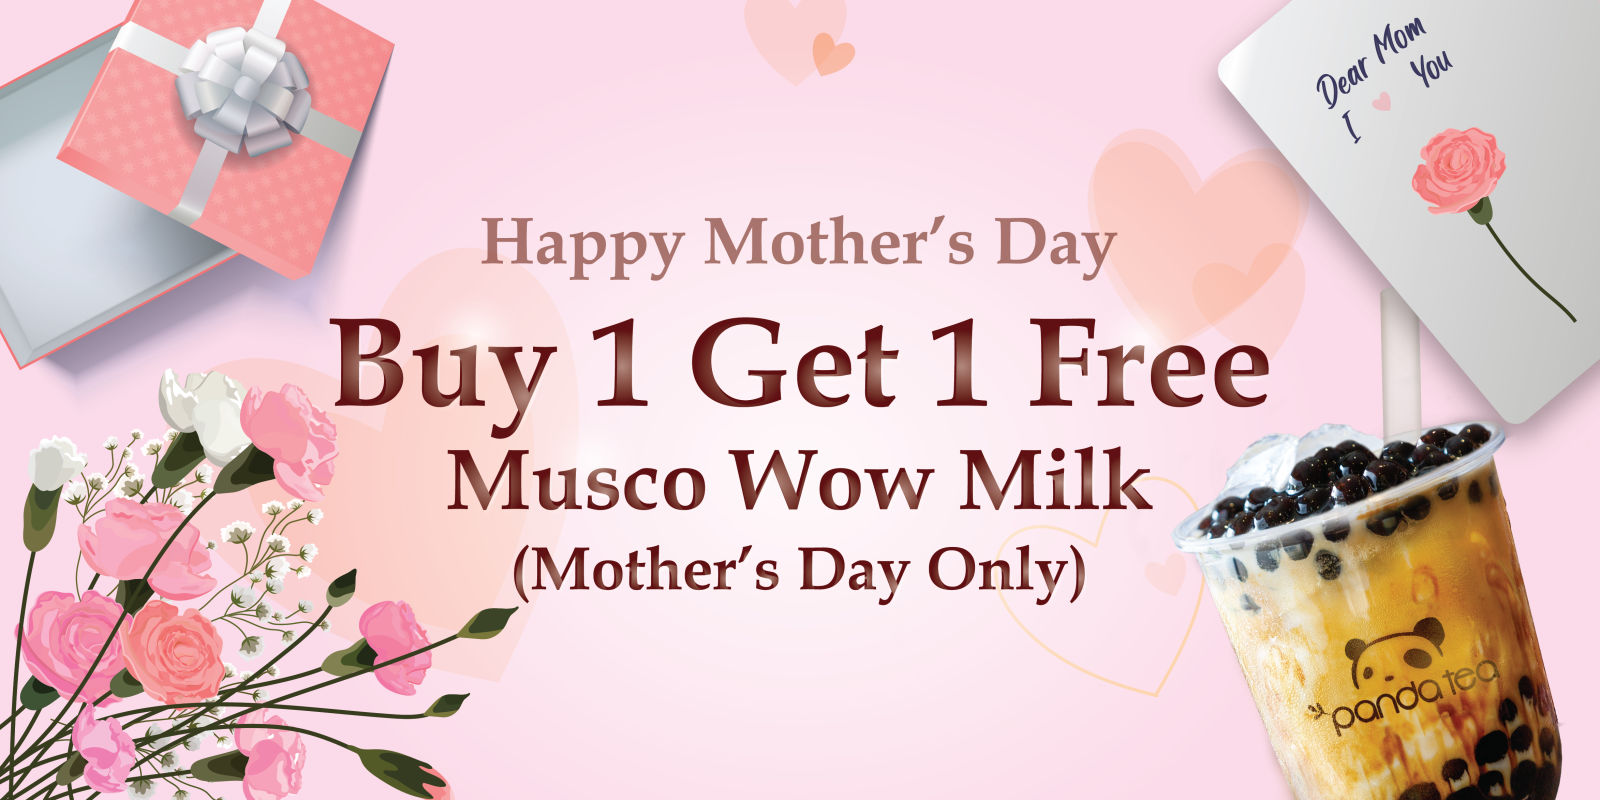 Musco Wow Milk is Buy 1 Get 1 Free on Mother's Day